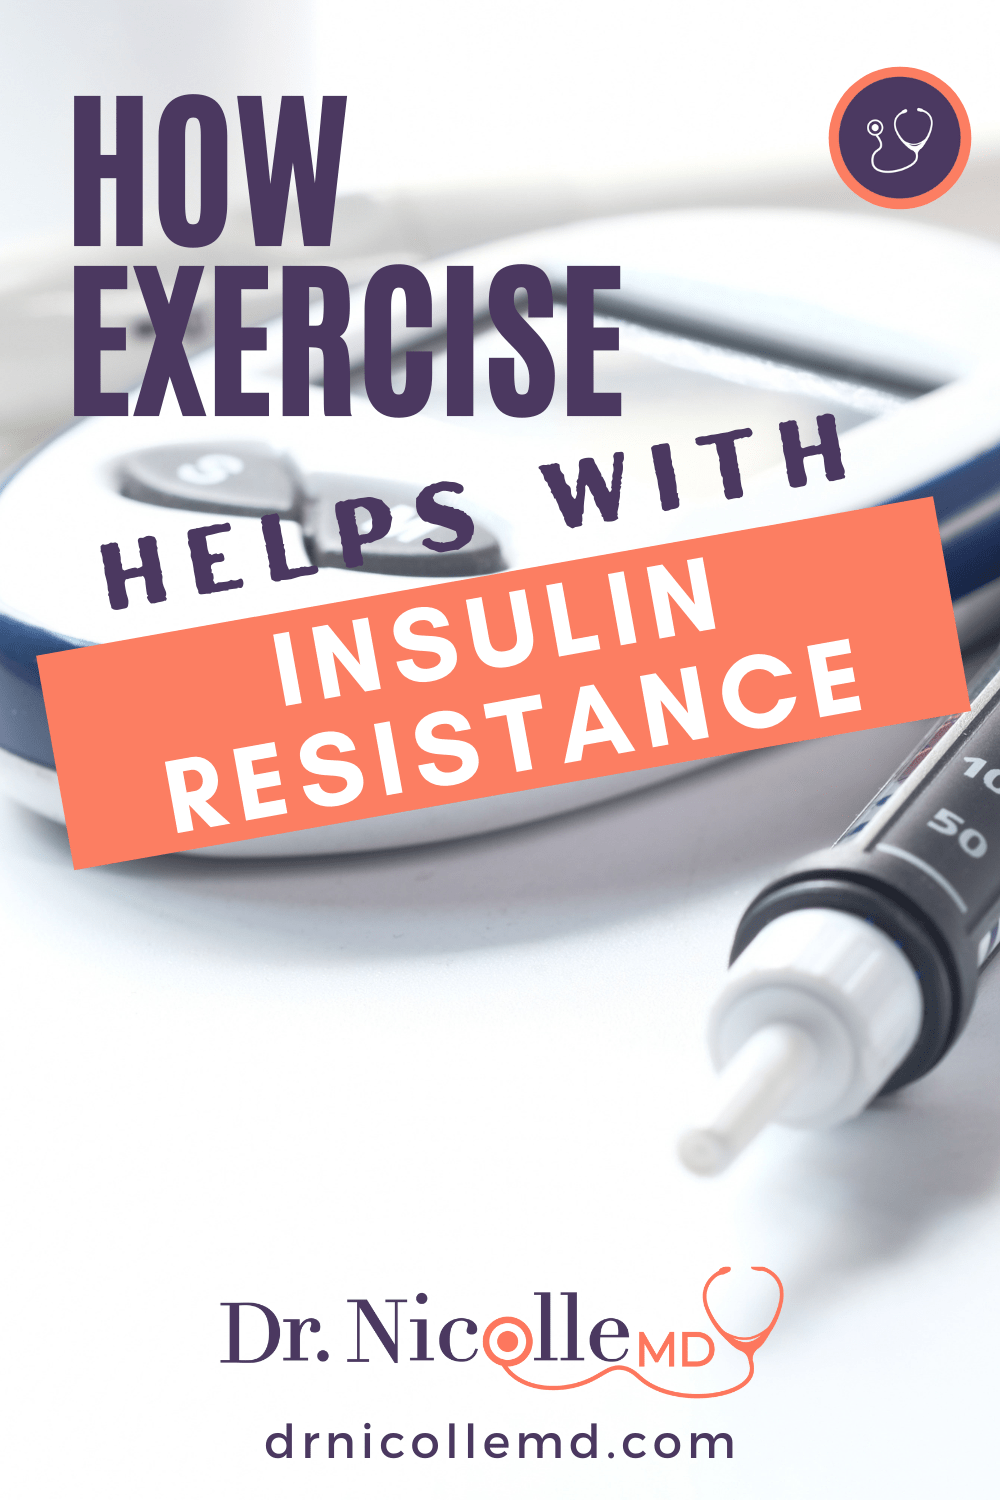 How Exercise Helps with Insulin Resistance